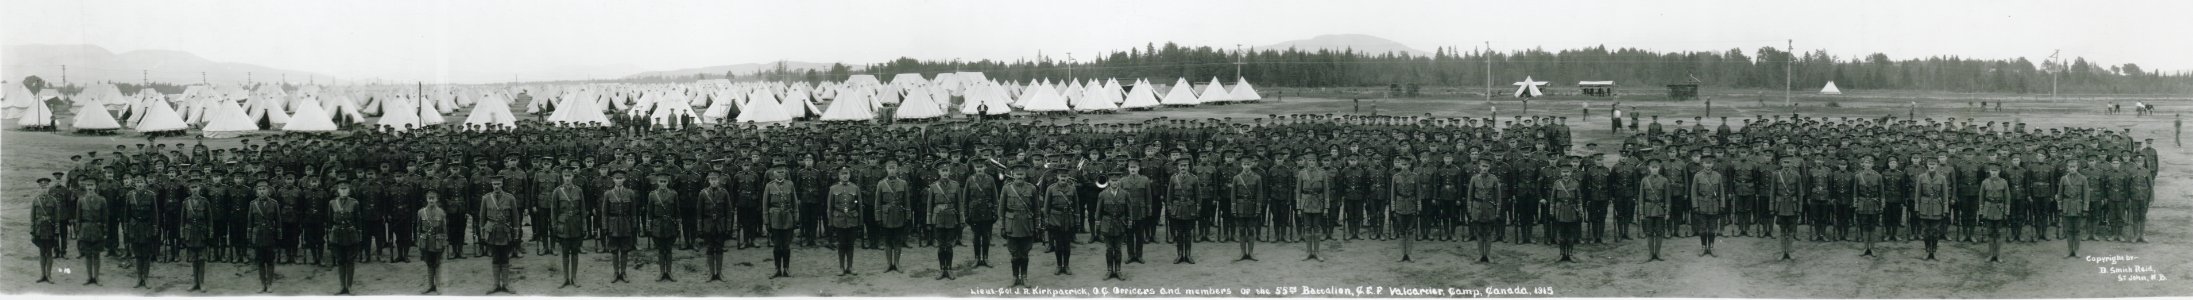 Lt.-Col. J.R. Kirkpatrick, OC, officers and members of the 55th Battalion, CEF, Valcartier Camp, Canada, 1915. No. 8.D (HS85-10-30690) photo